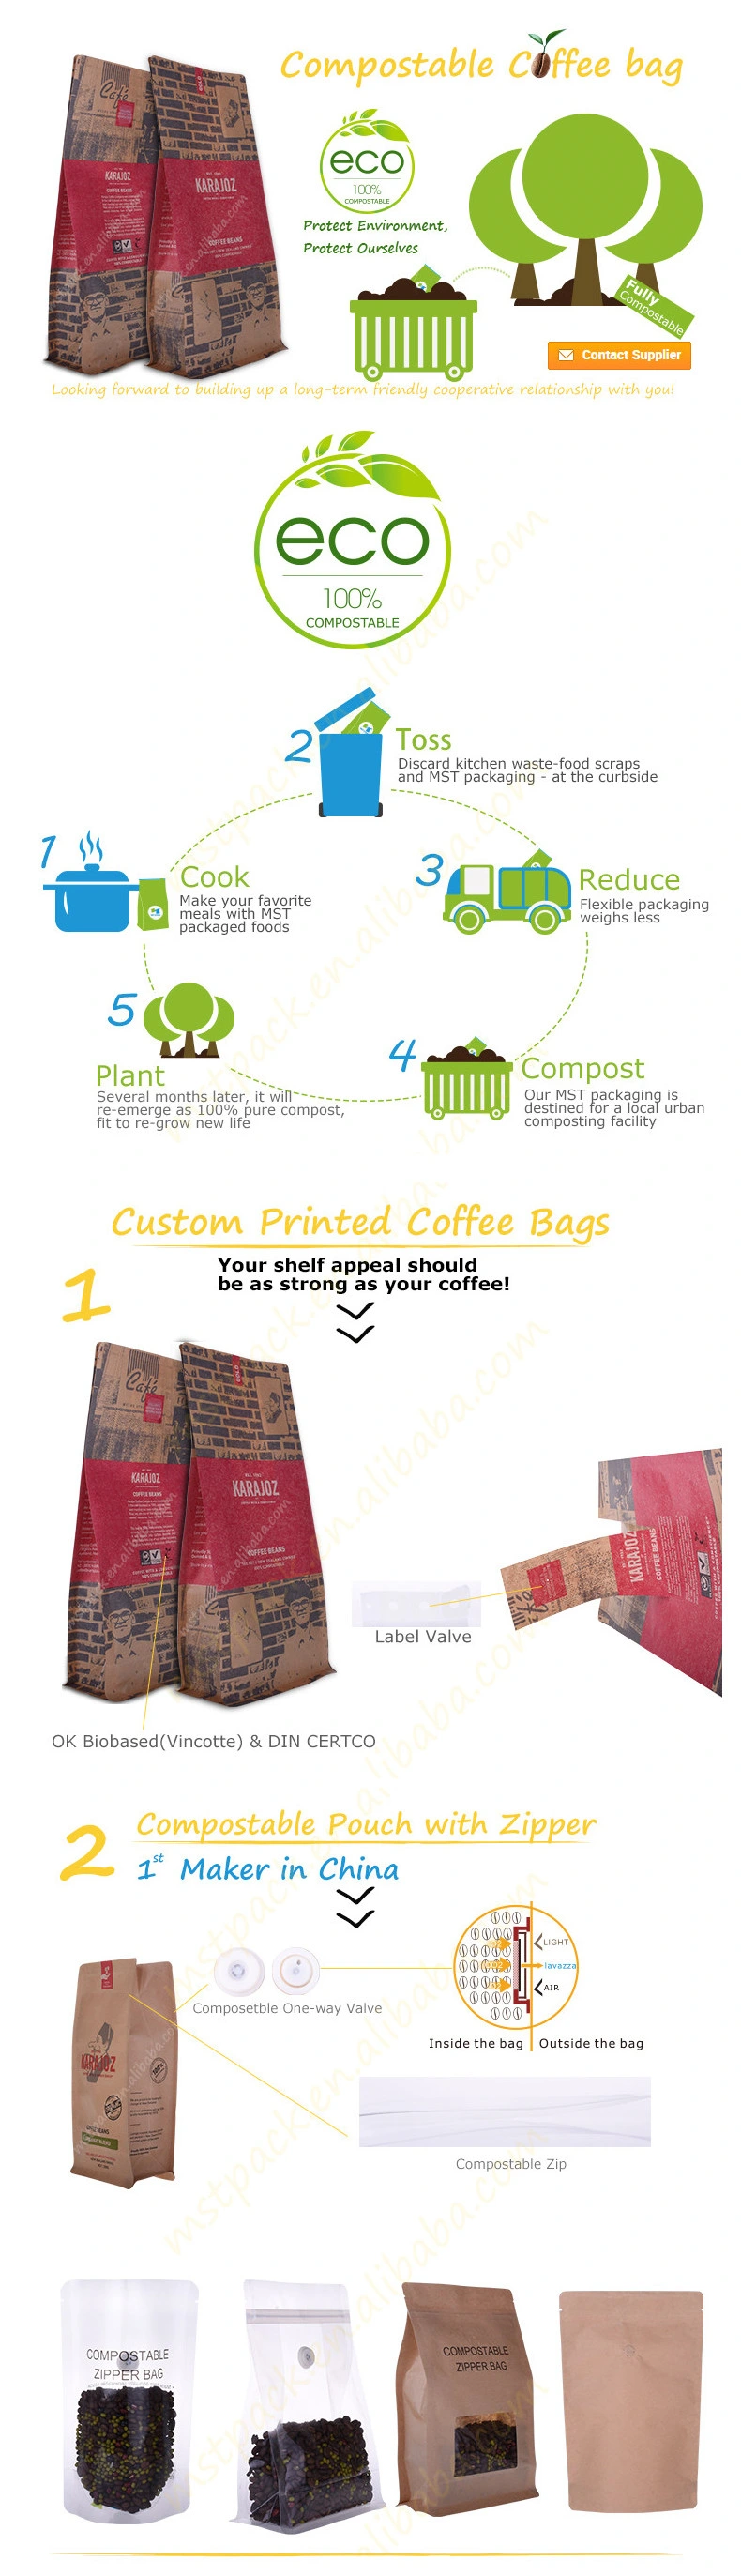 Eco Friendly Coffee Pack Biodegradable Packaging with One-Way Valve